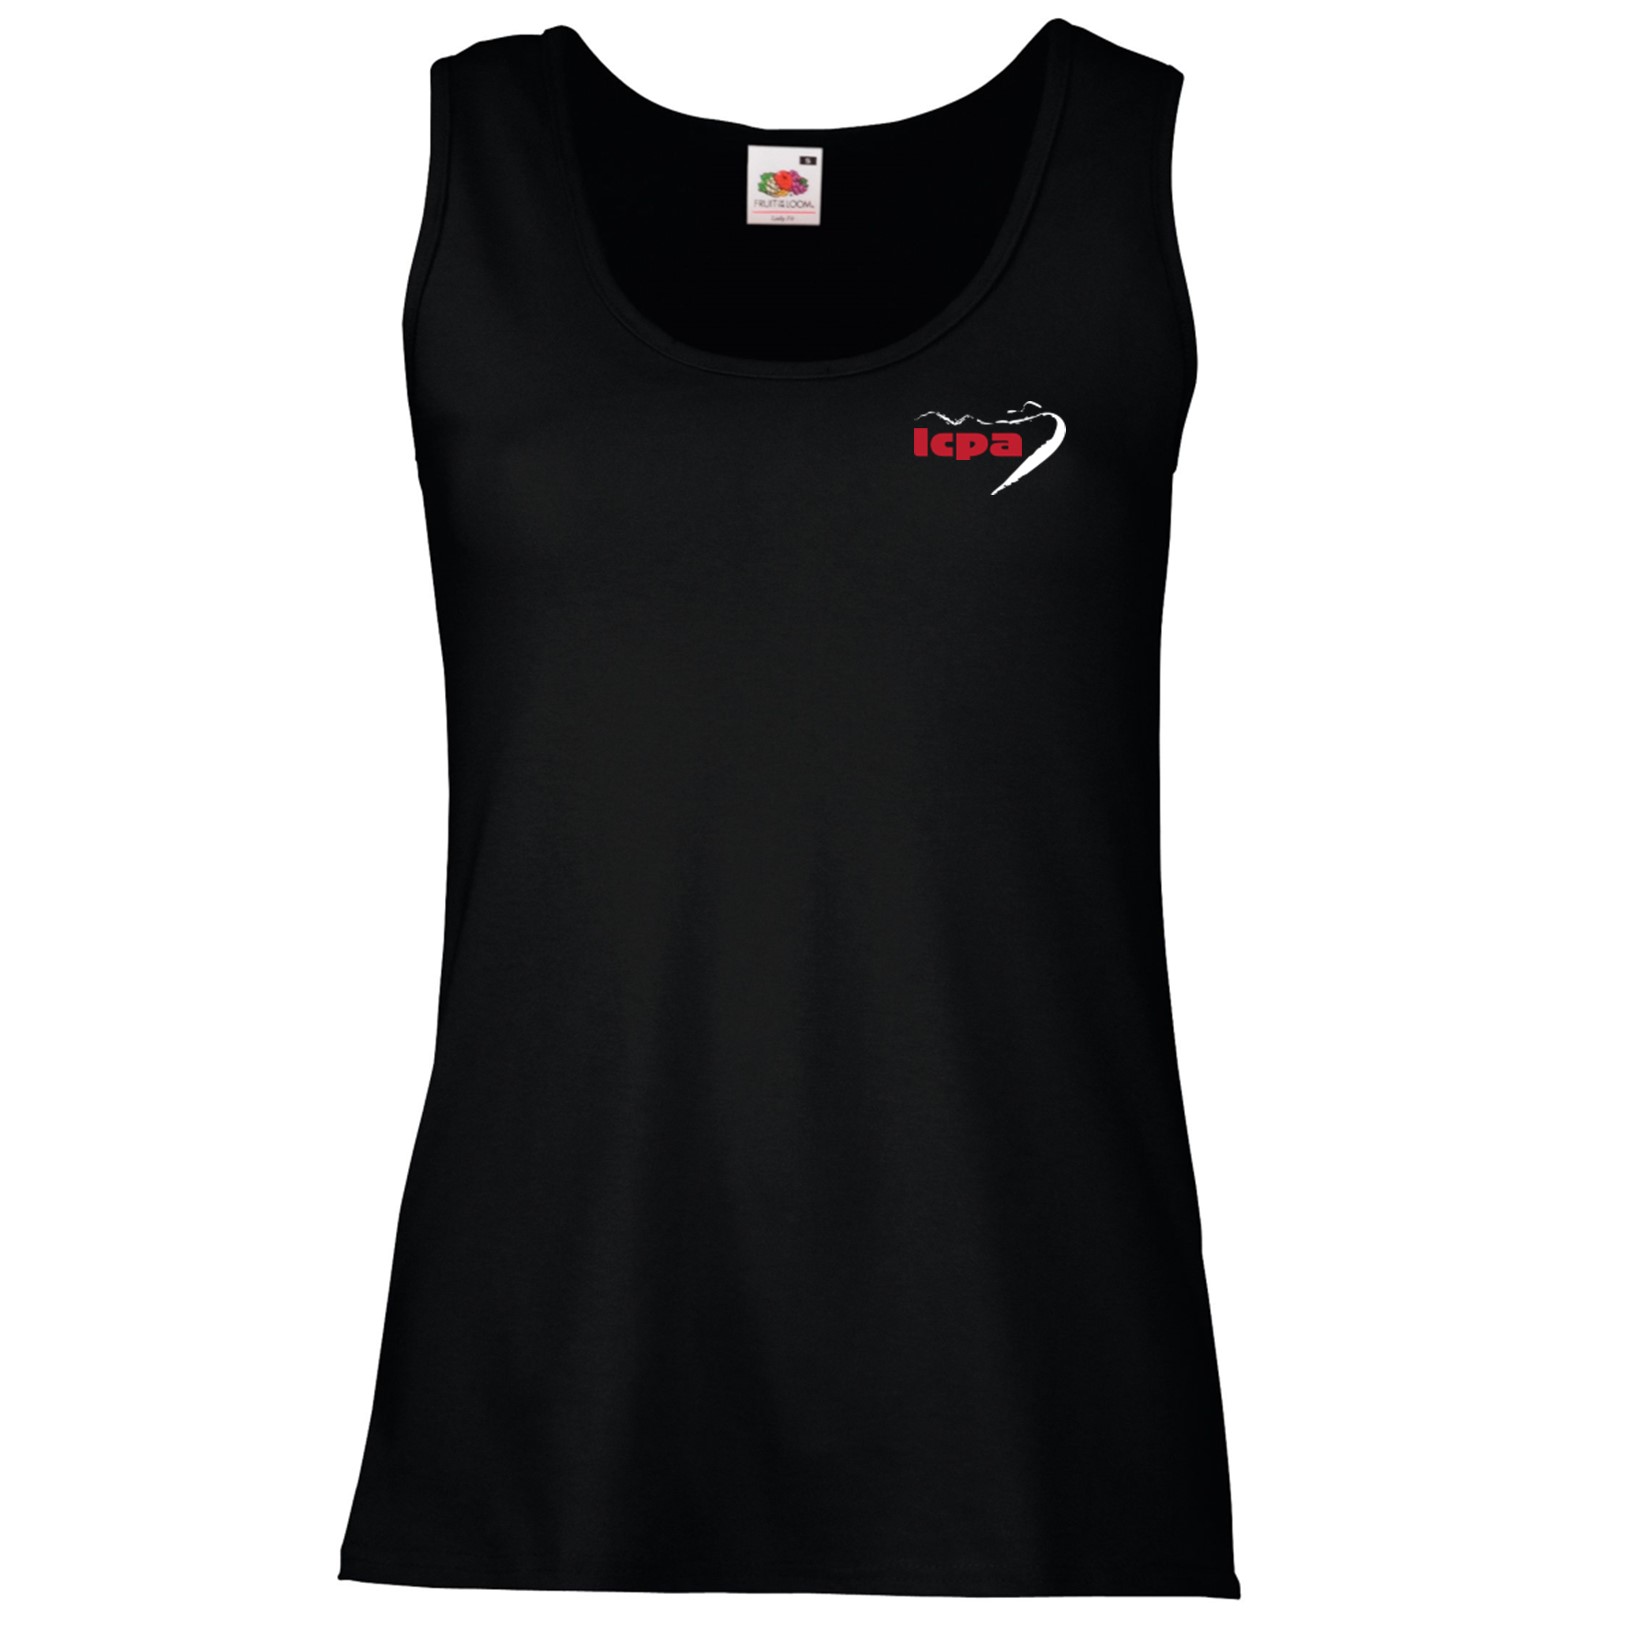 LCPA-016 Women's athletic valueweight vest